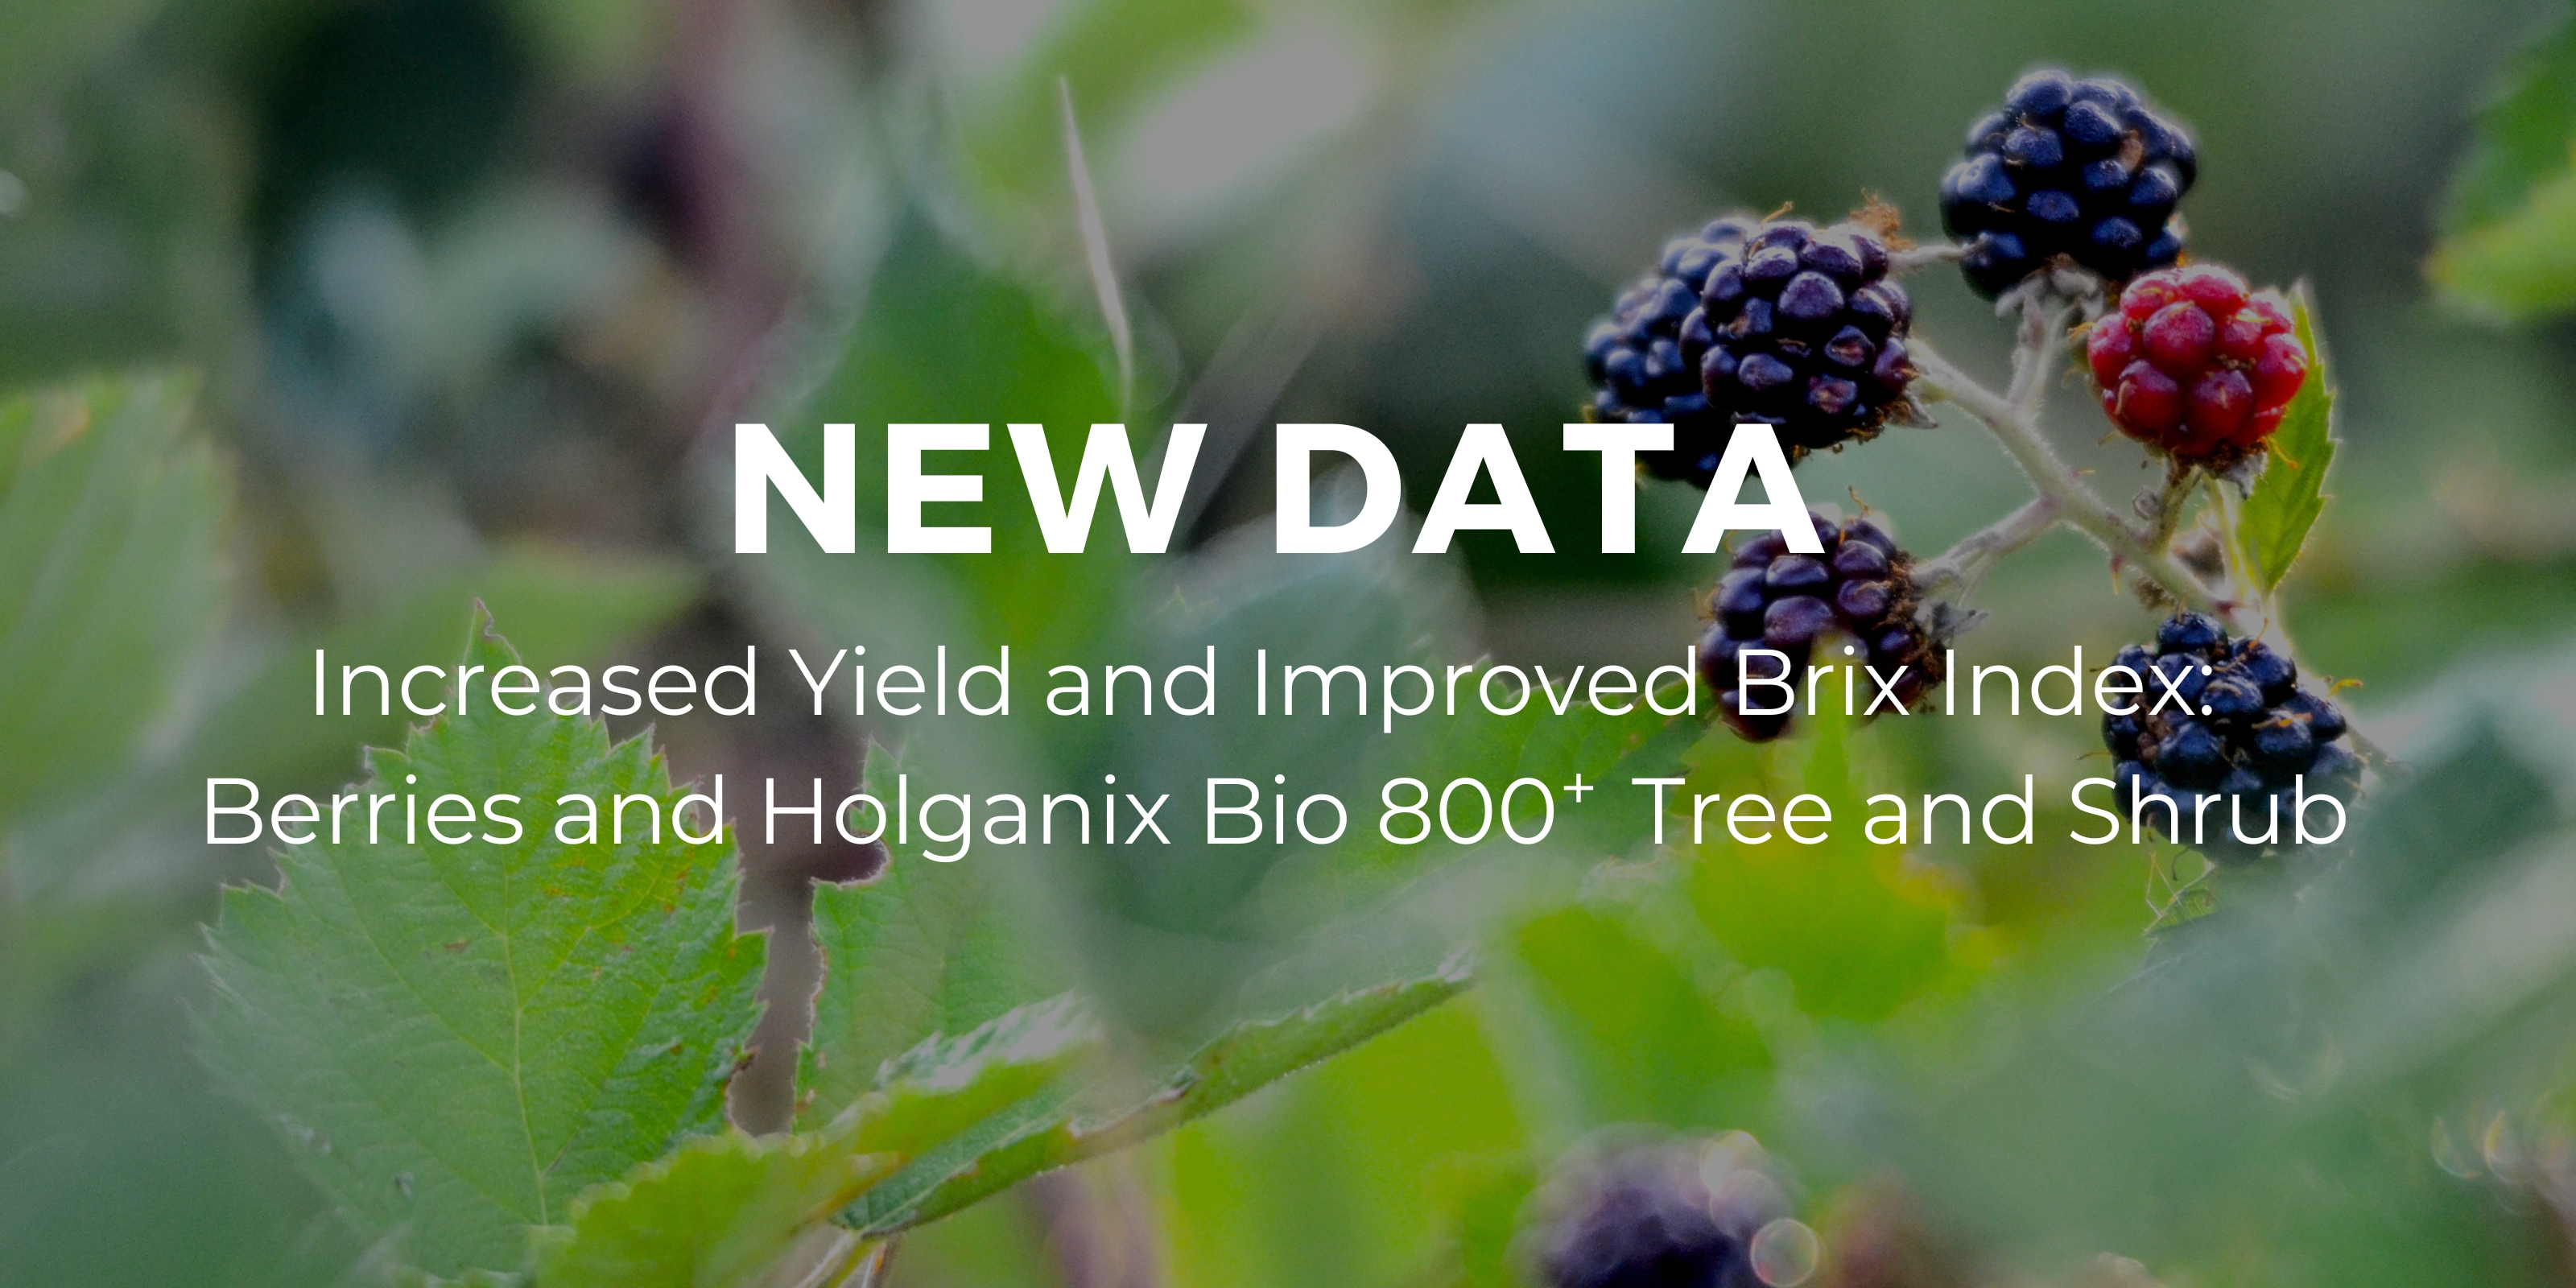 New Data: Increased Yield and Improved Brix Index